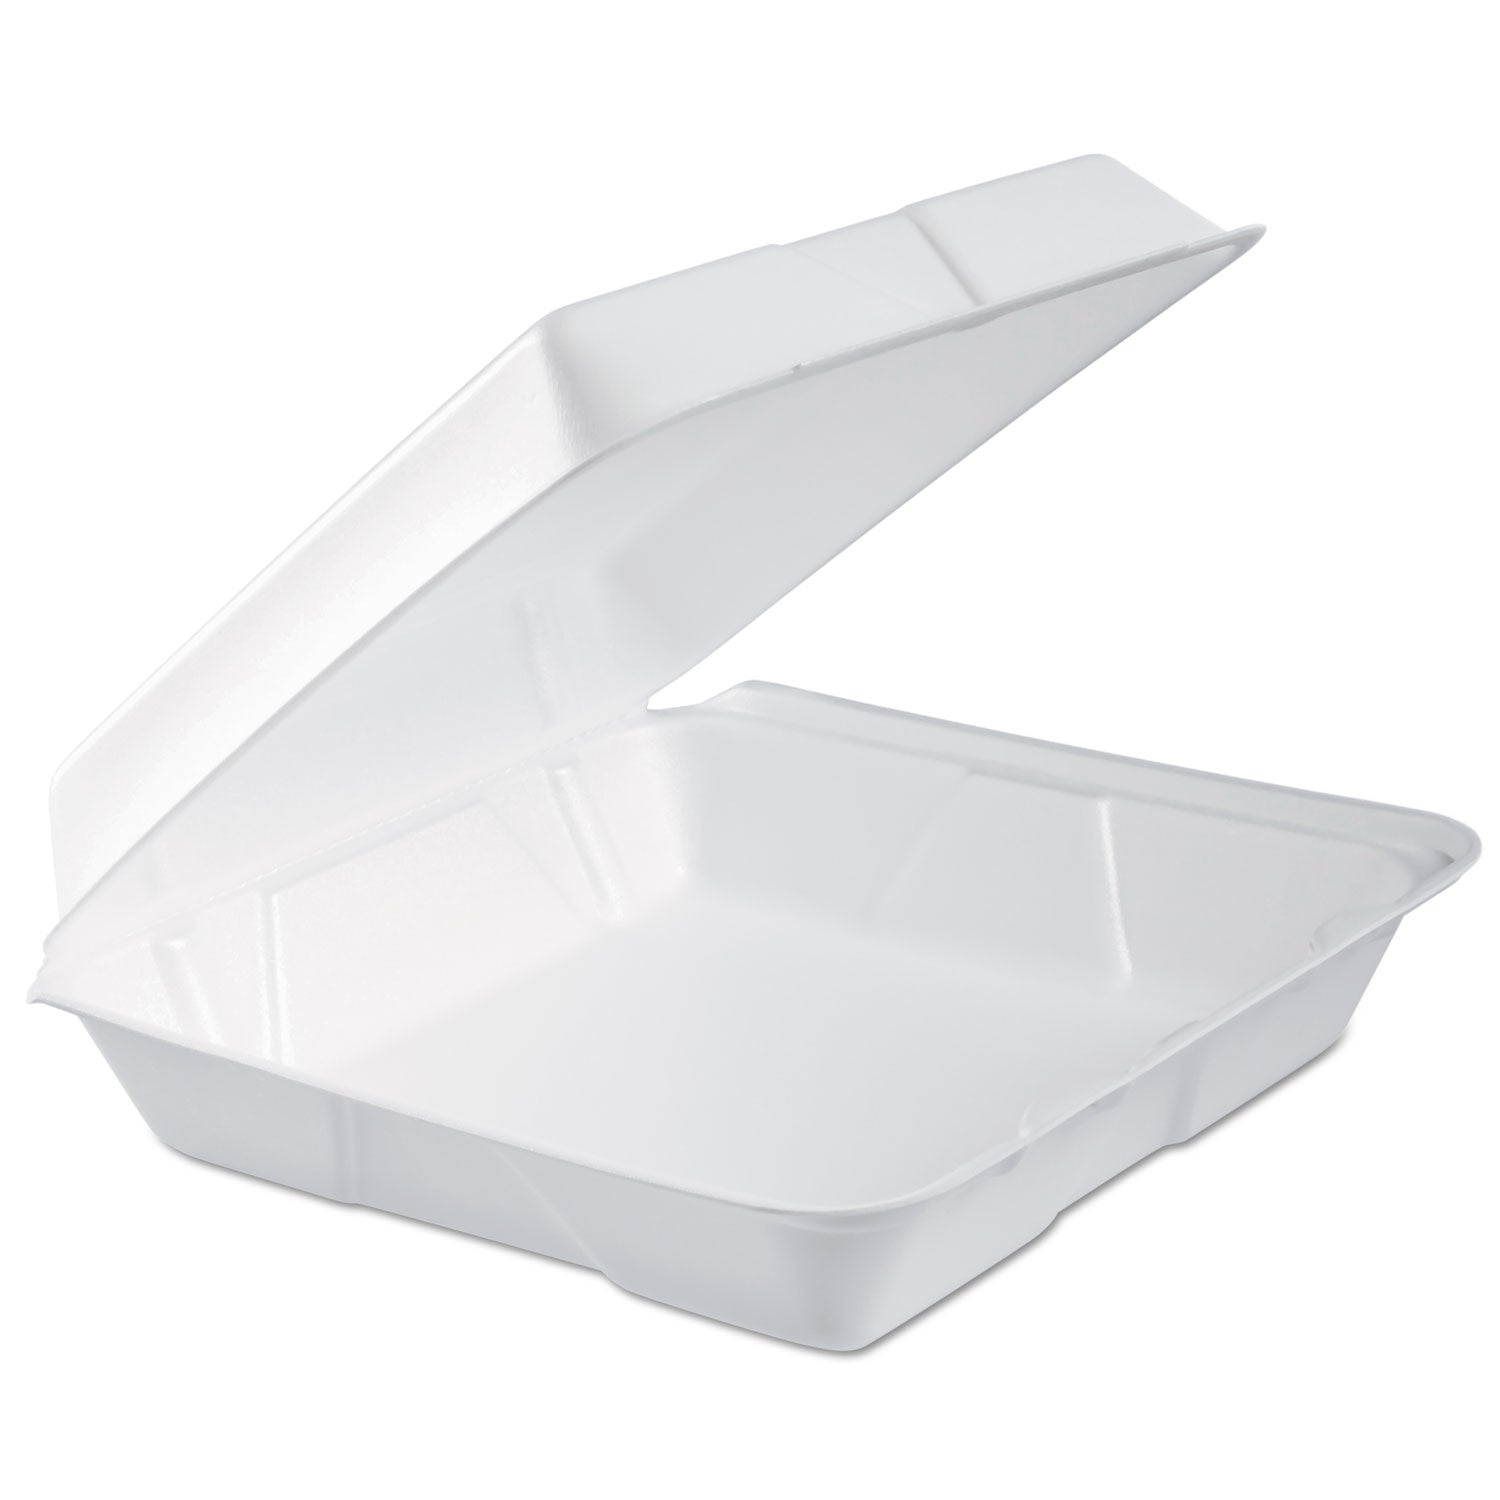 foam-hinged-lid-container-performer-perforated-lid-93-x-95-x-3-white-100-bag-2-bag-carton_dcc95htpf1r - 1